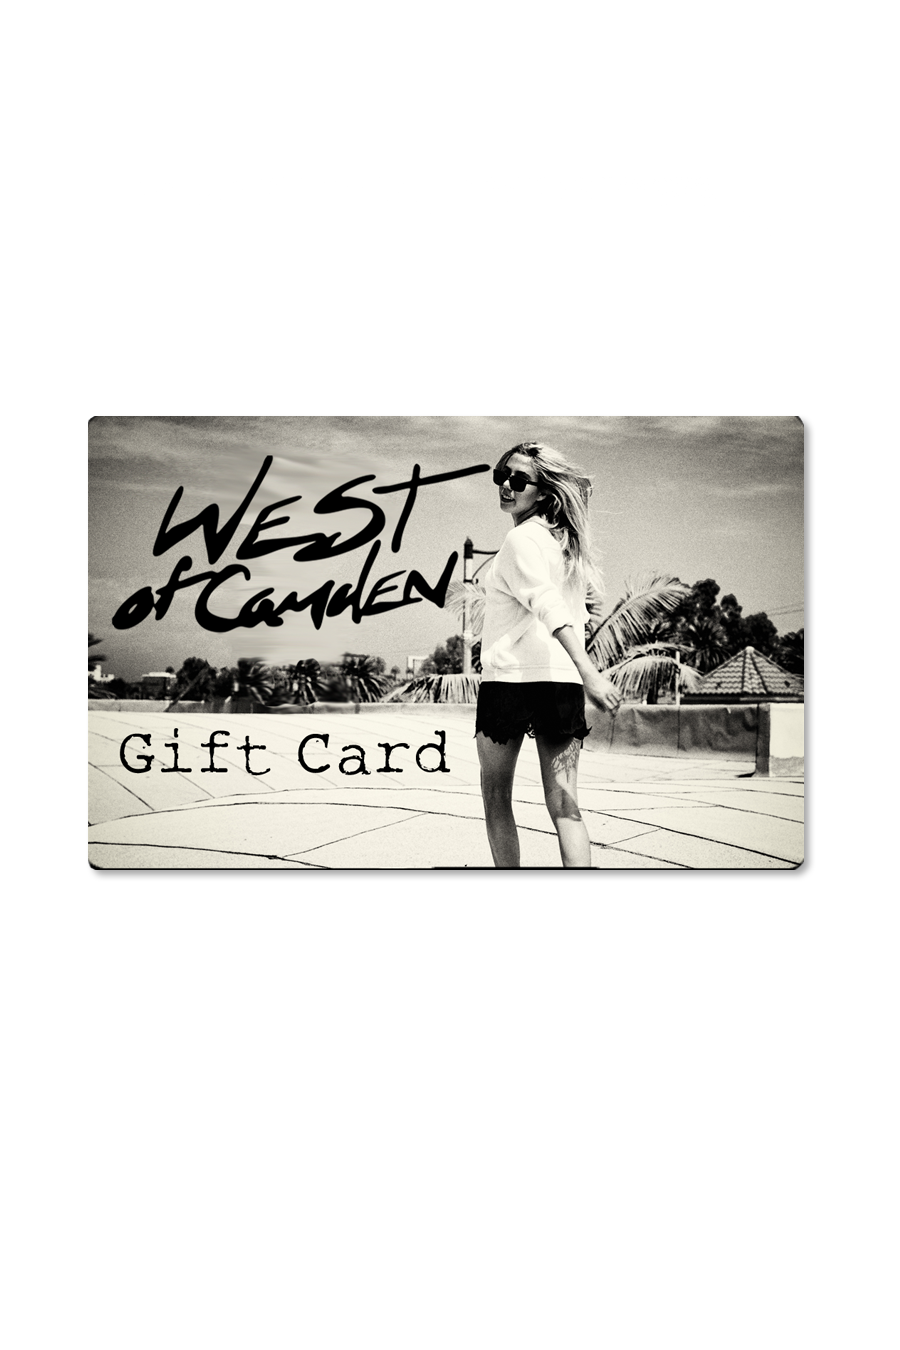 Gift Card - West of Camden